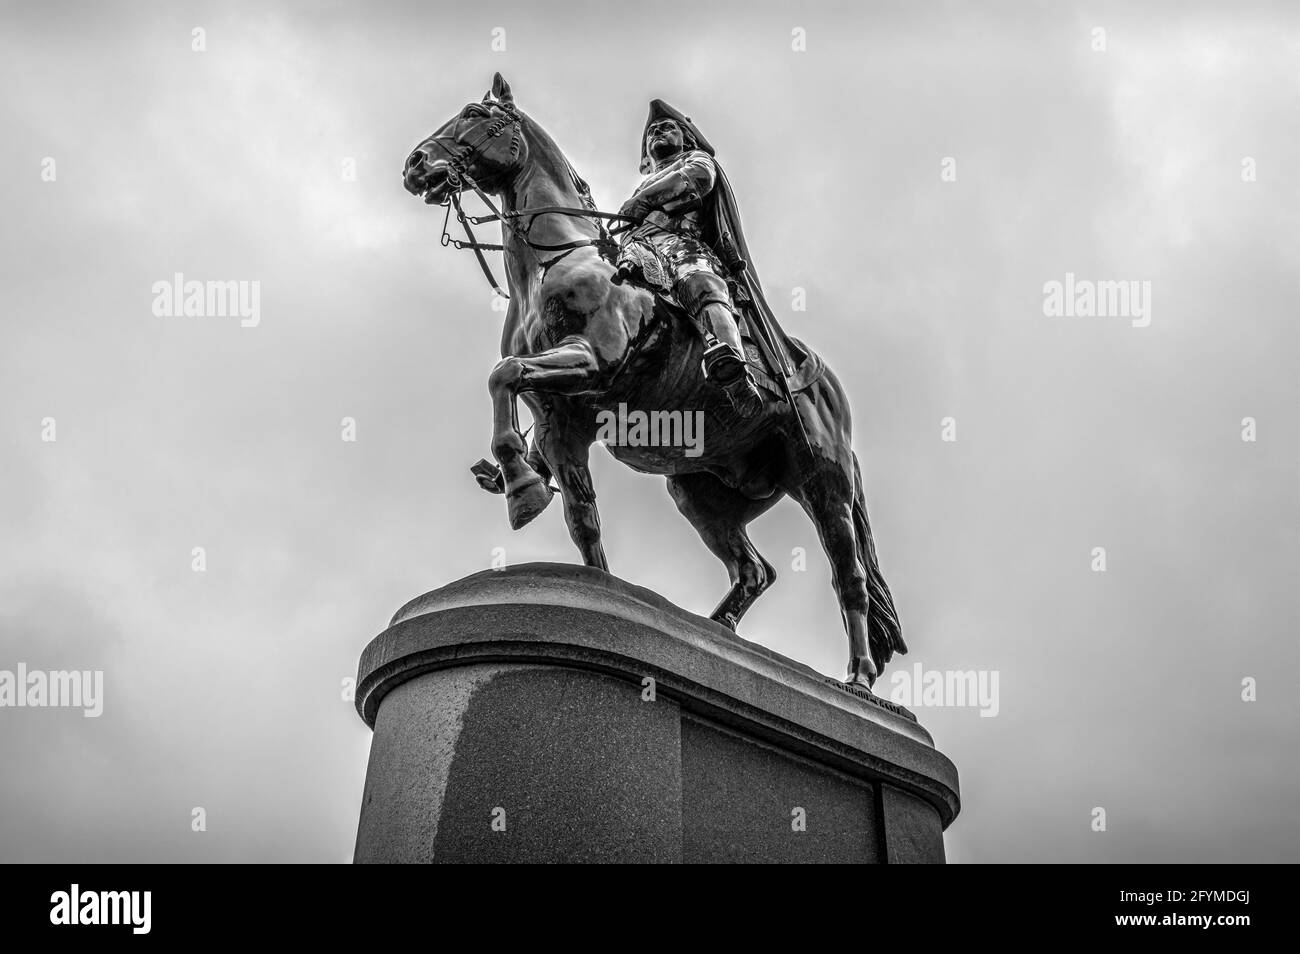 Bronze monument to Peter the Great riding a horse. Upward view. Black and white. Stock Photo